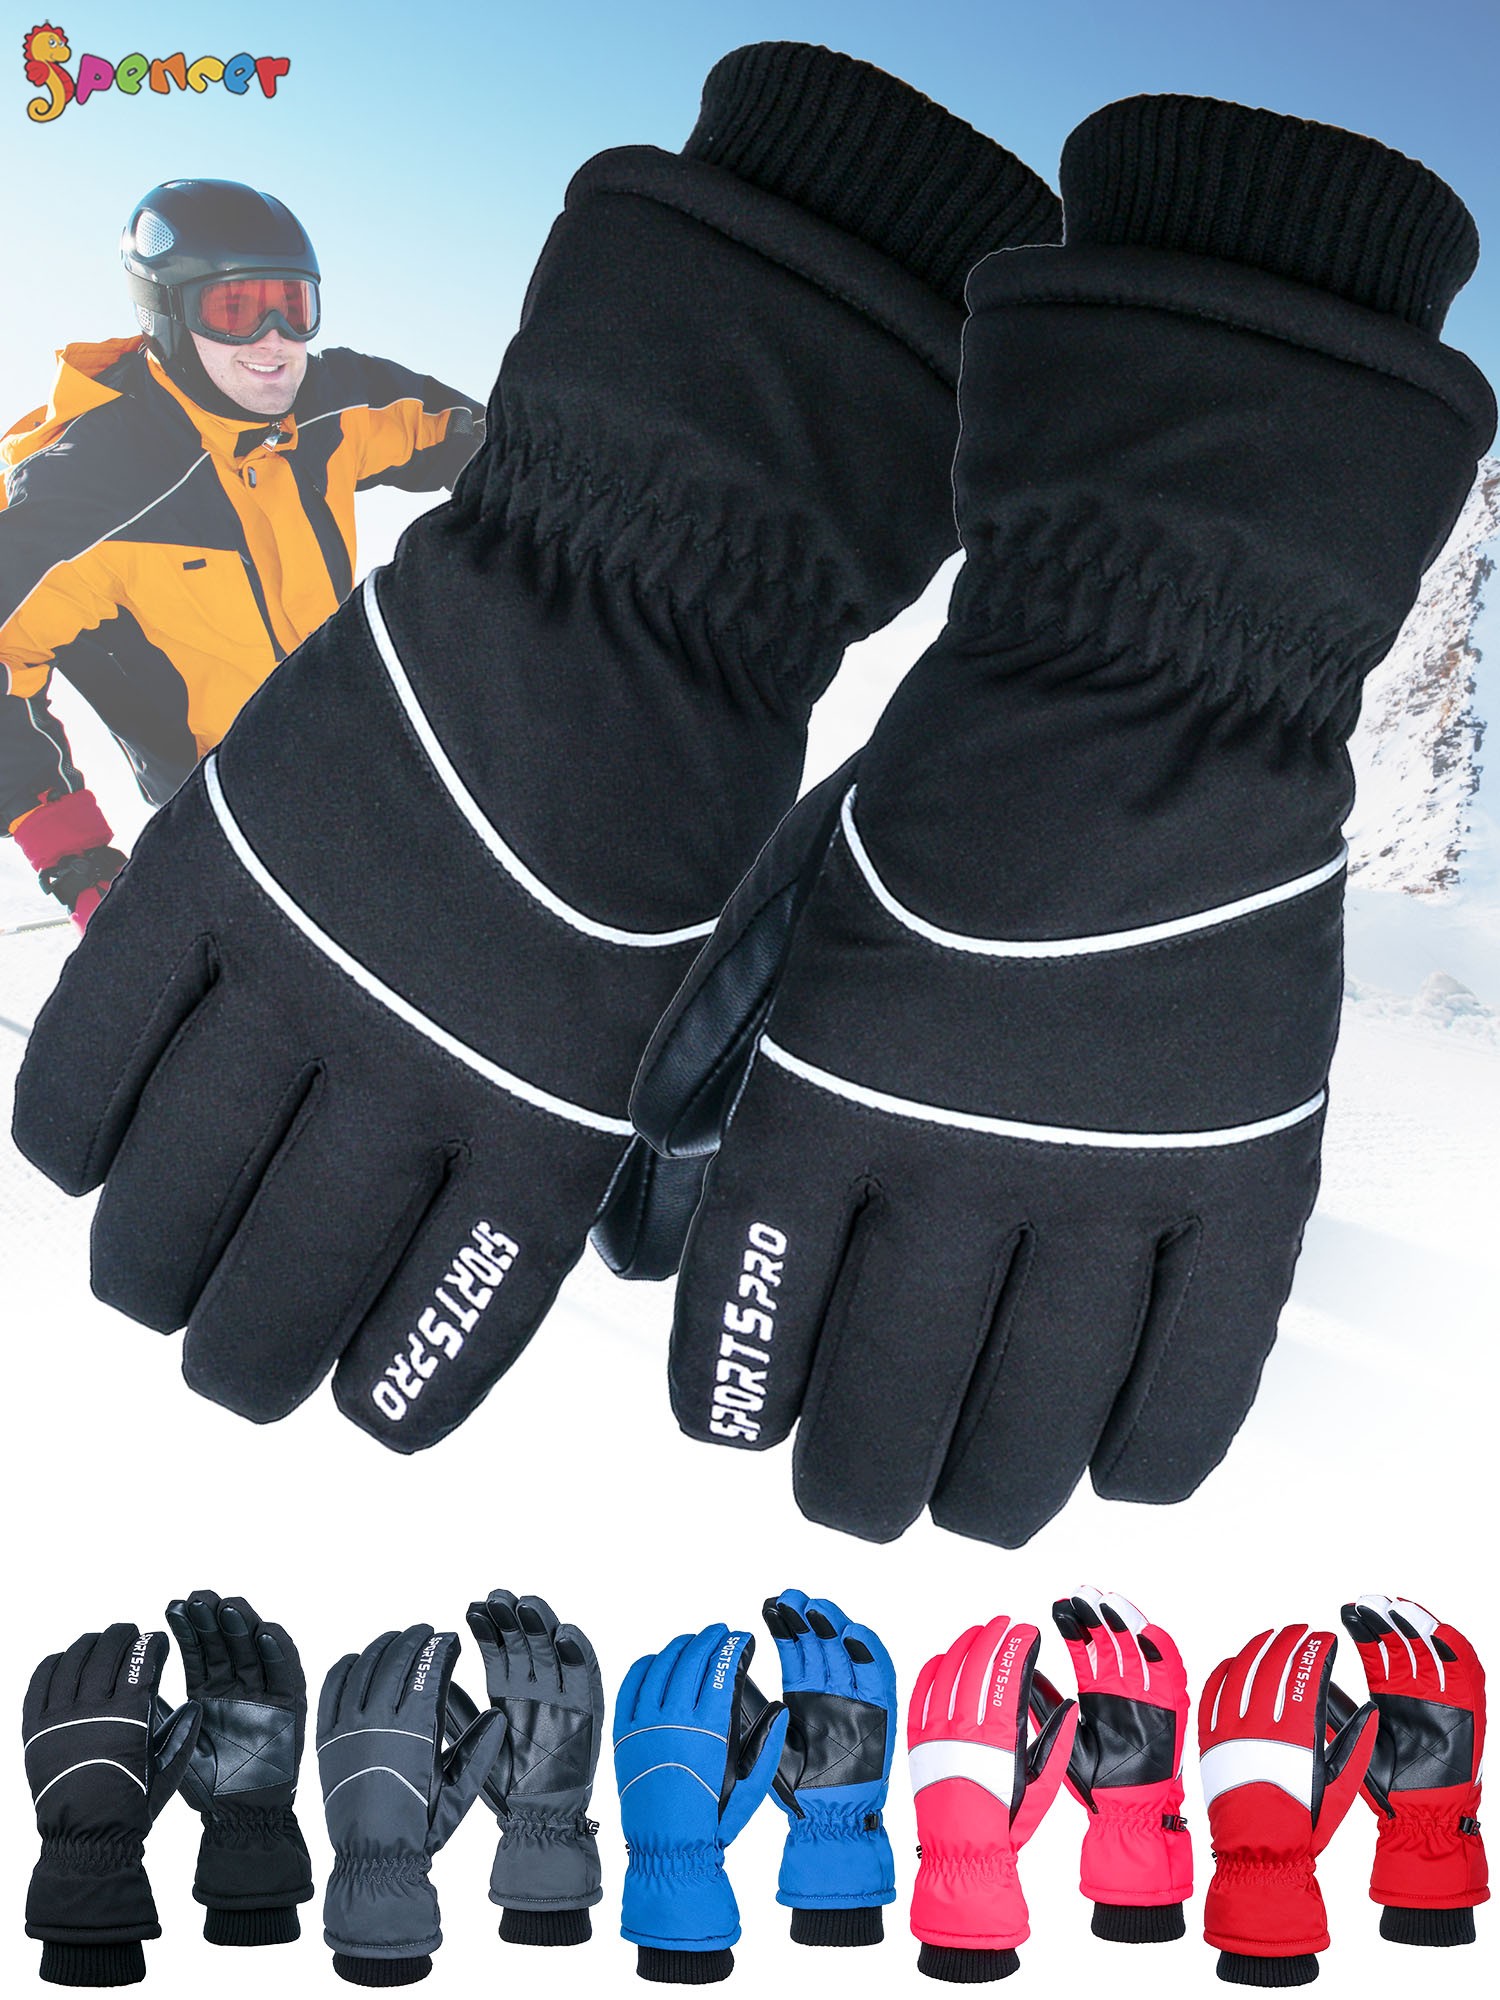 Spencer Ski & Snow Gloves for Men Women, Waterproof Winter Touchscreen Snowboard Gloves for Cold Weather Skiing and Snowboarding - image 2 of 8